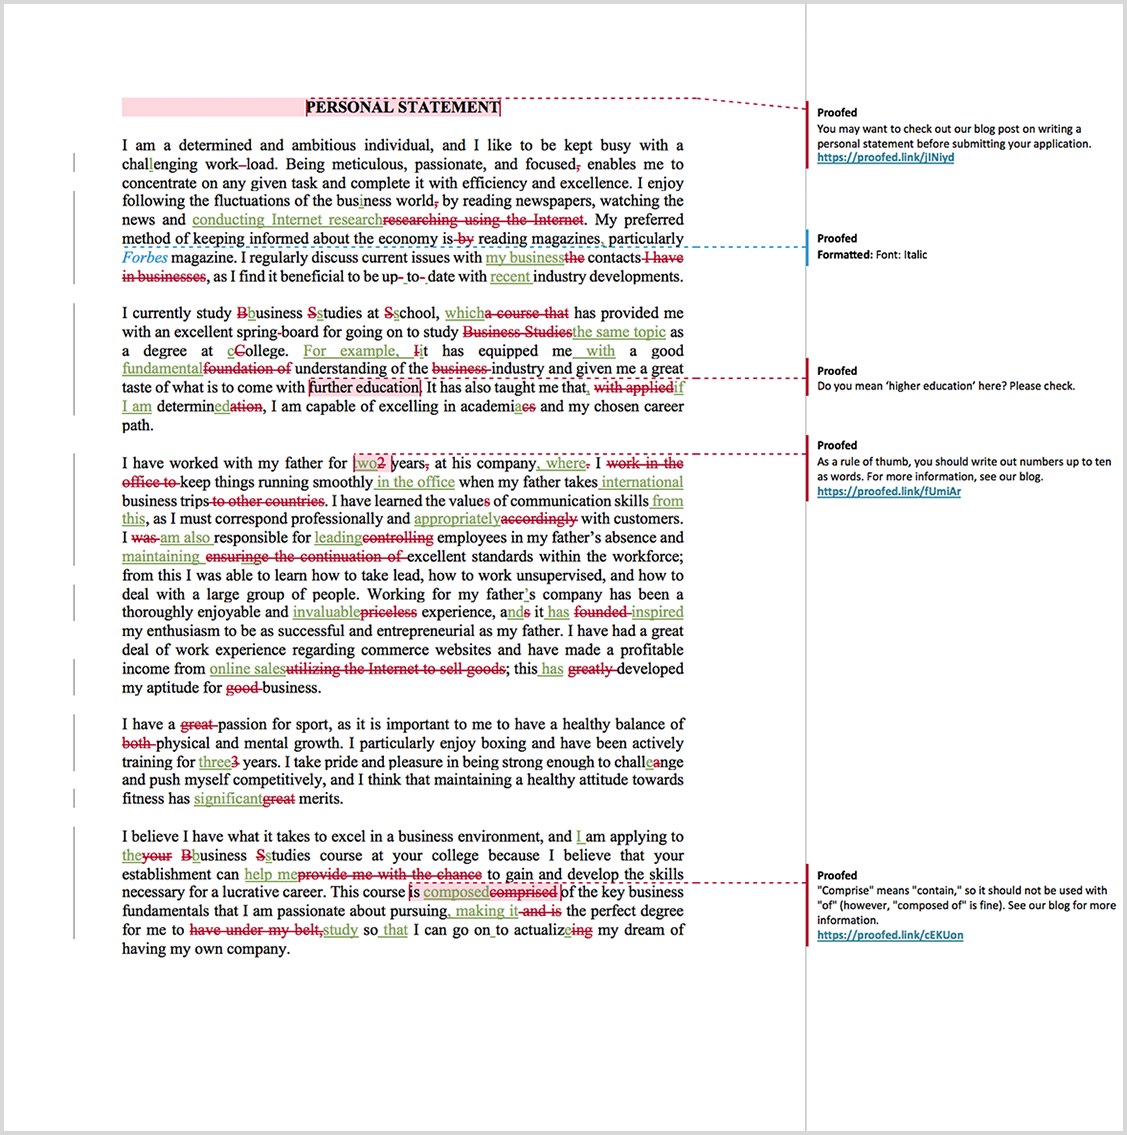 Personal Statement Proofreading - English Monitor